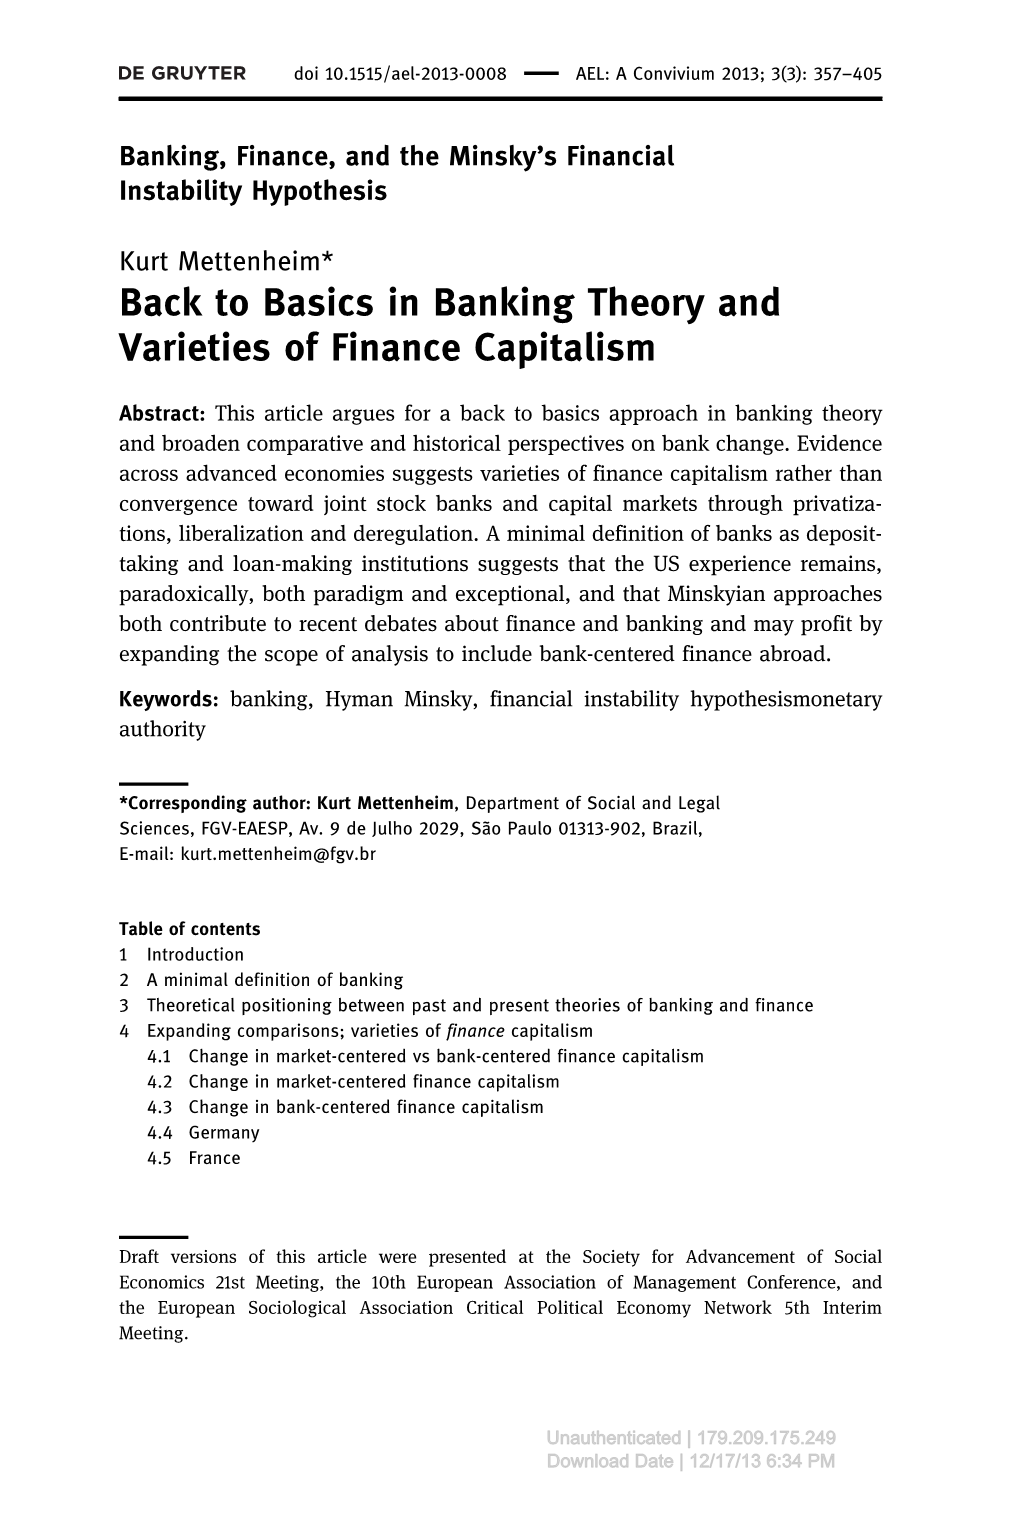 Basics in Banking Theory and Varieties of Finance Capitalism